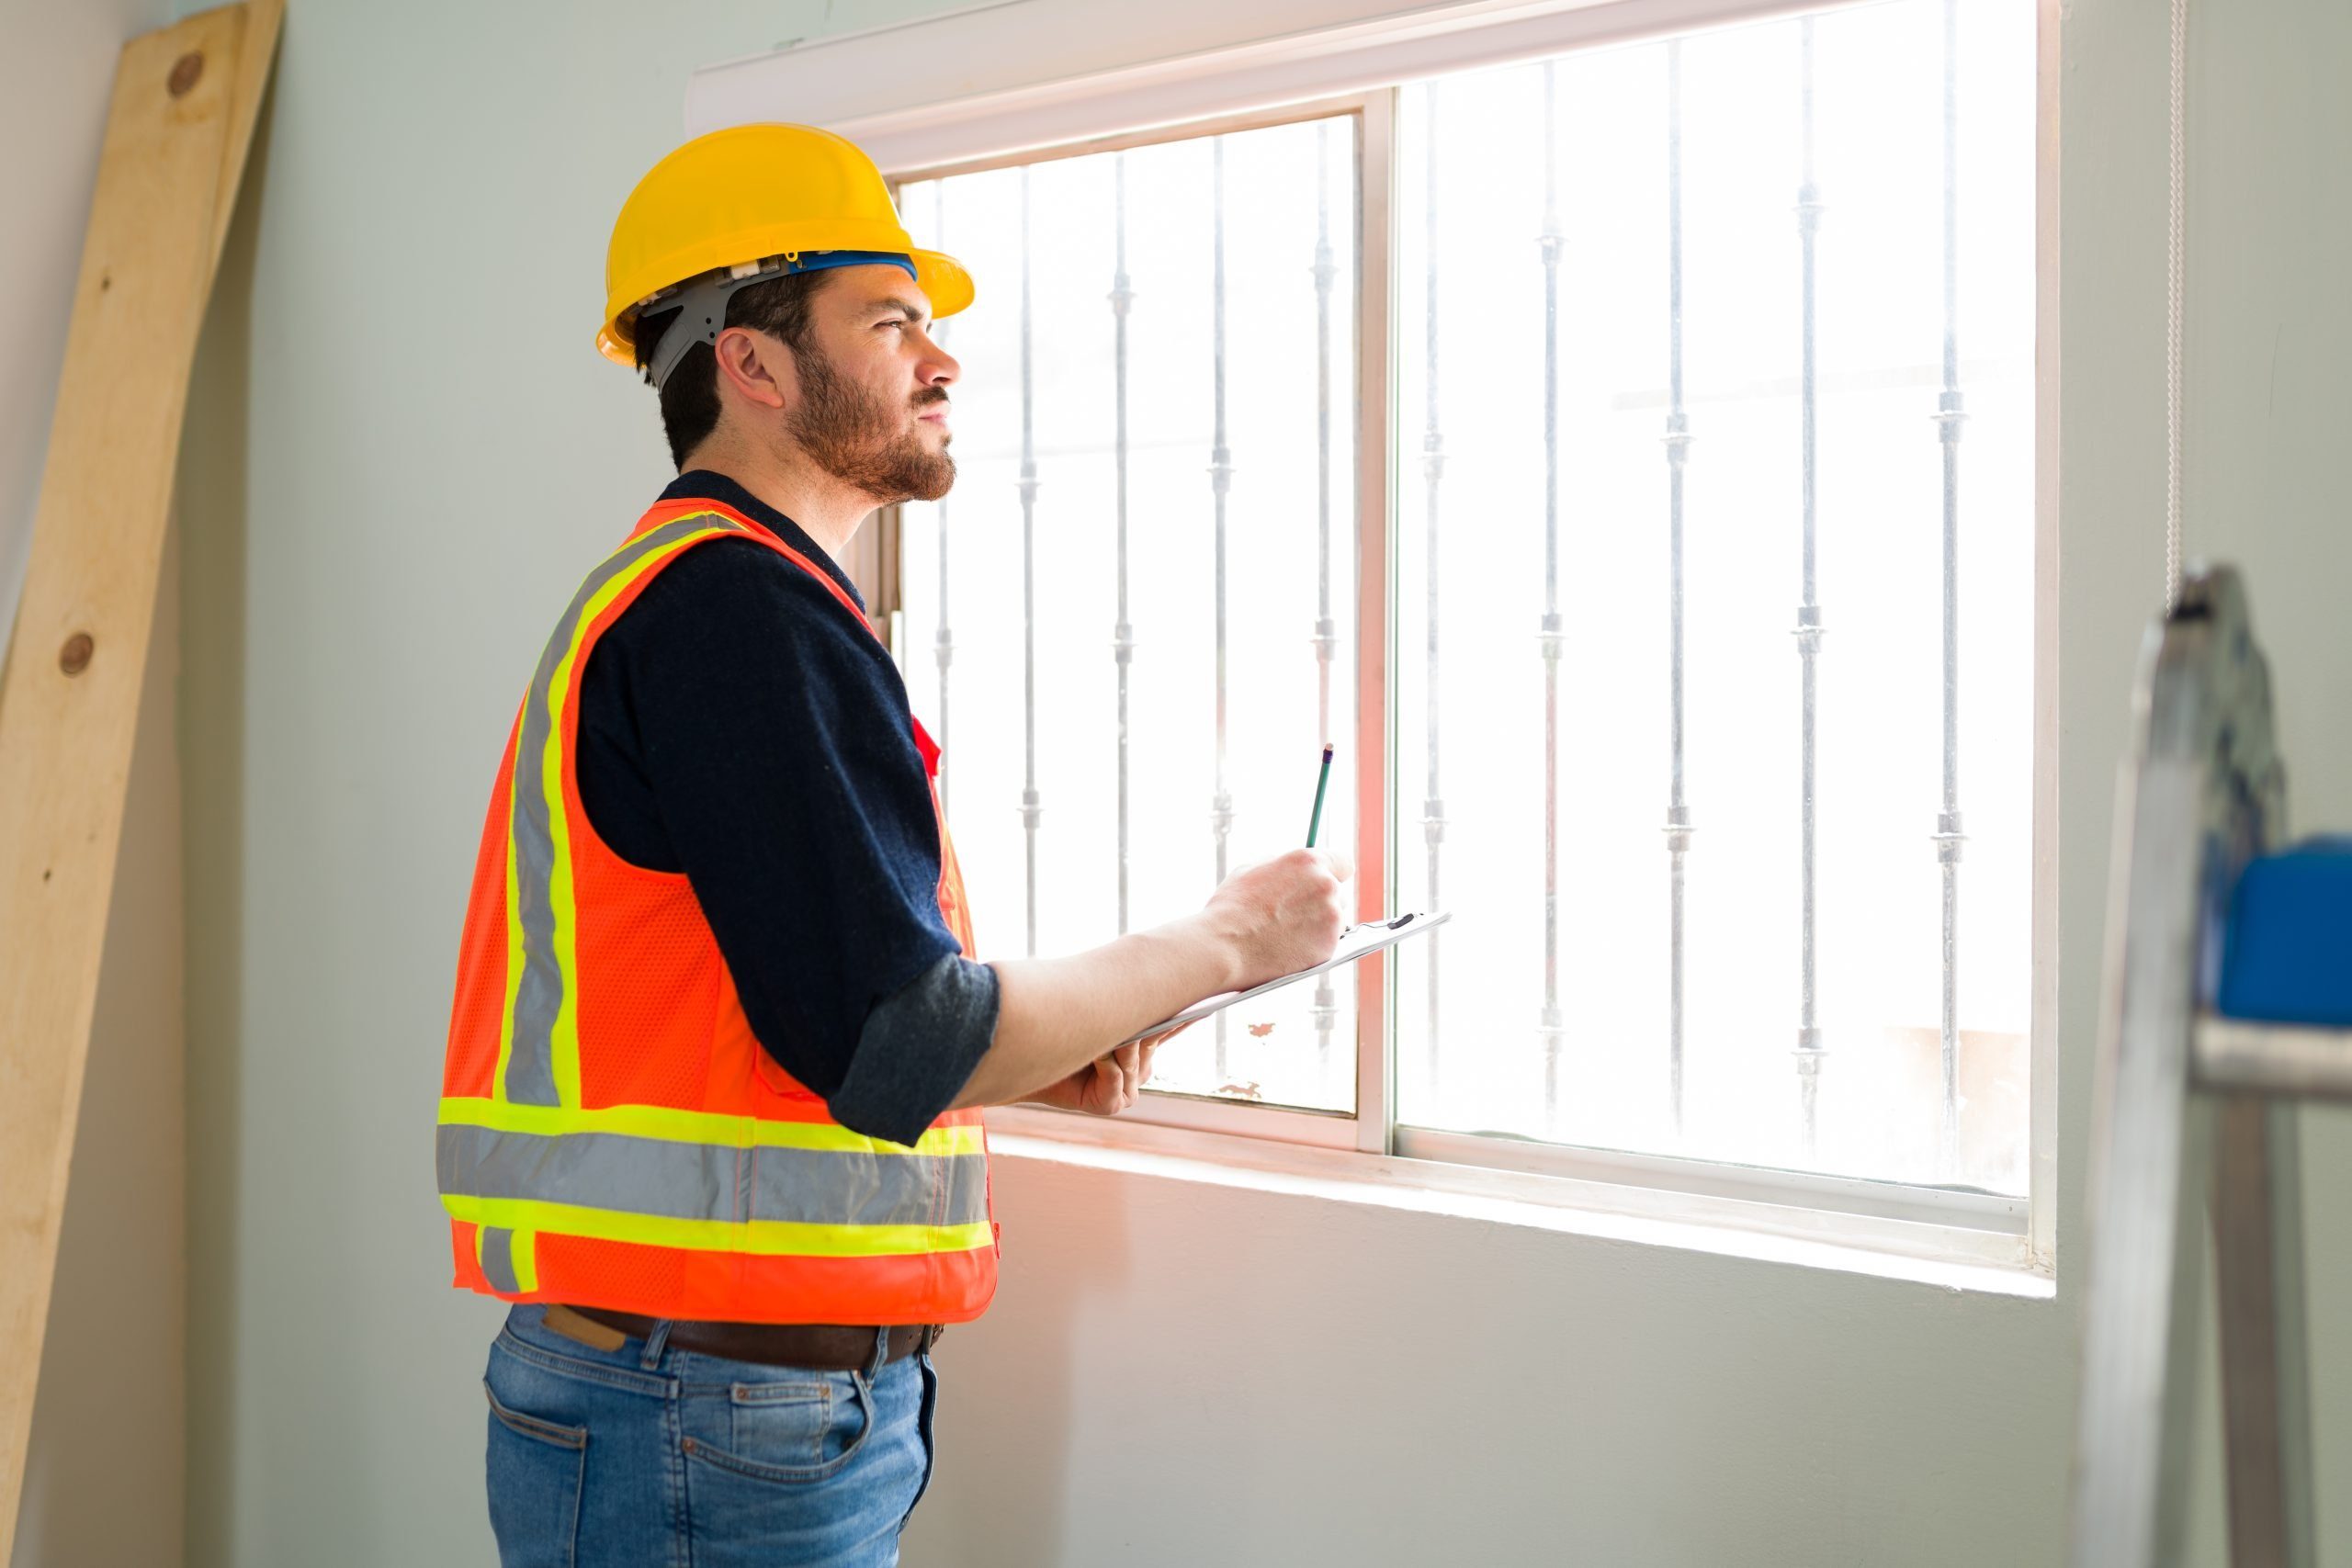 Professional contractor looking at the construction details